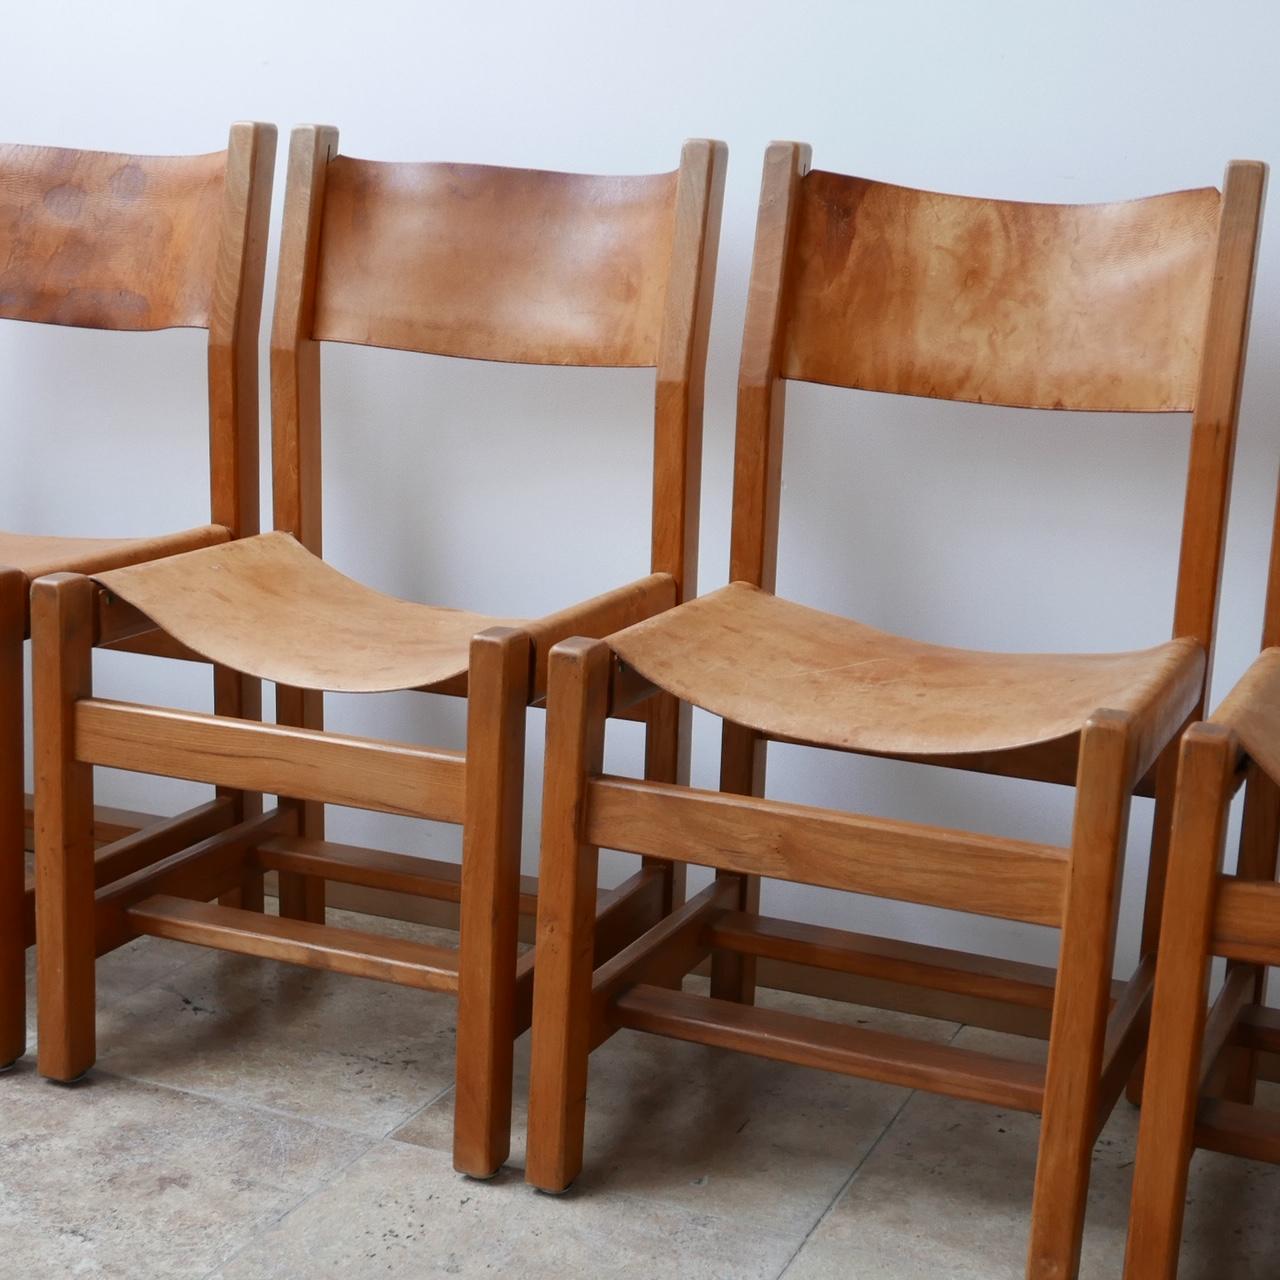 20th Century Maison Regain Elm and Leather Midcentury Dining Chairs, '6'